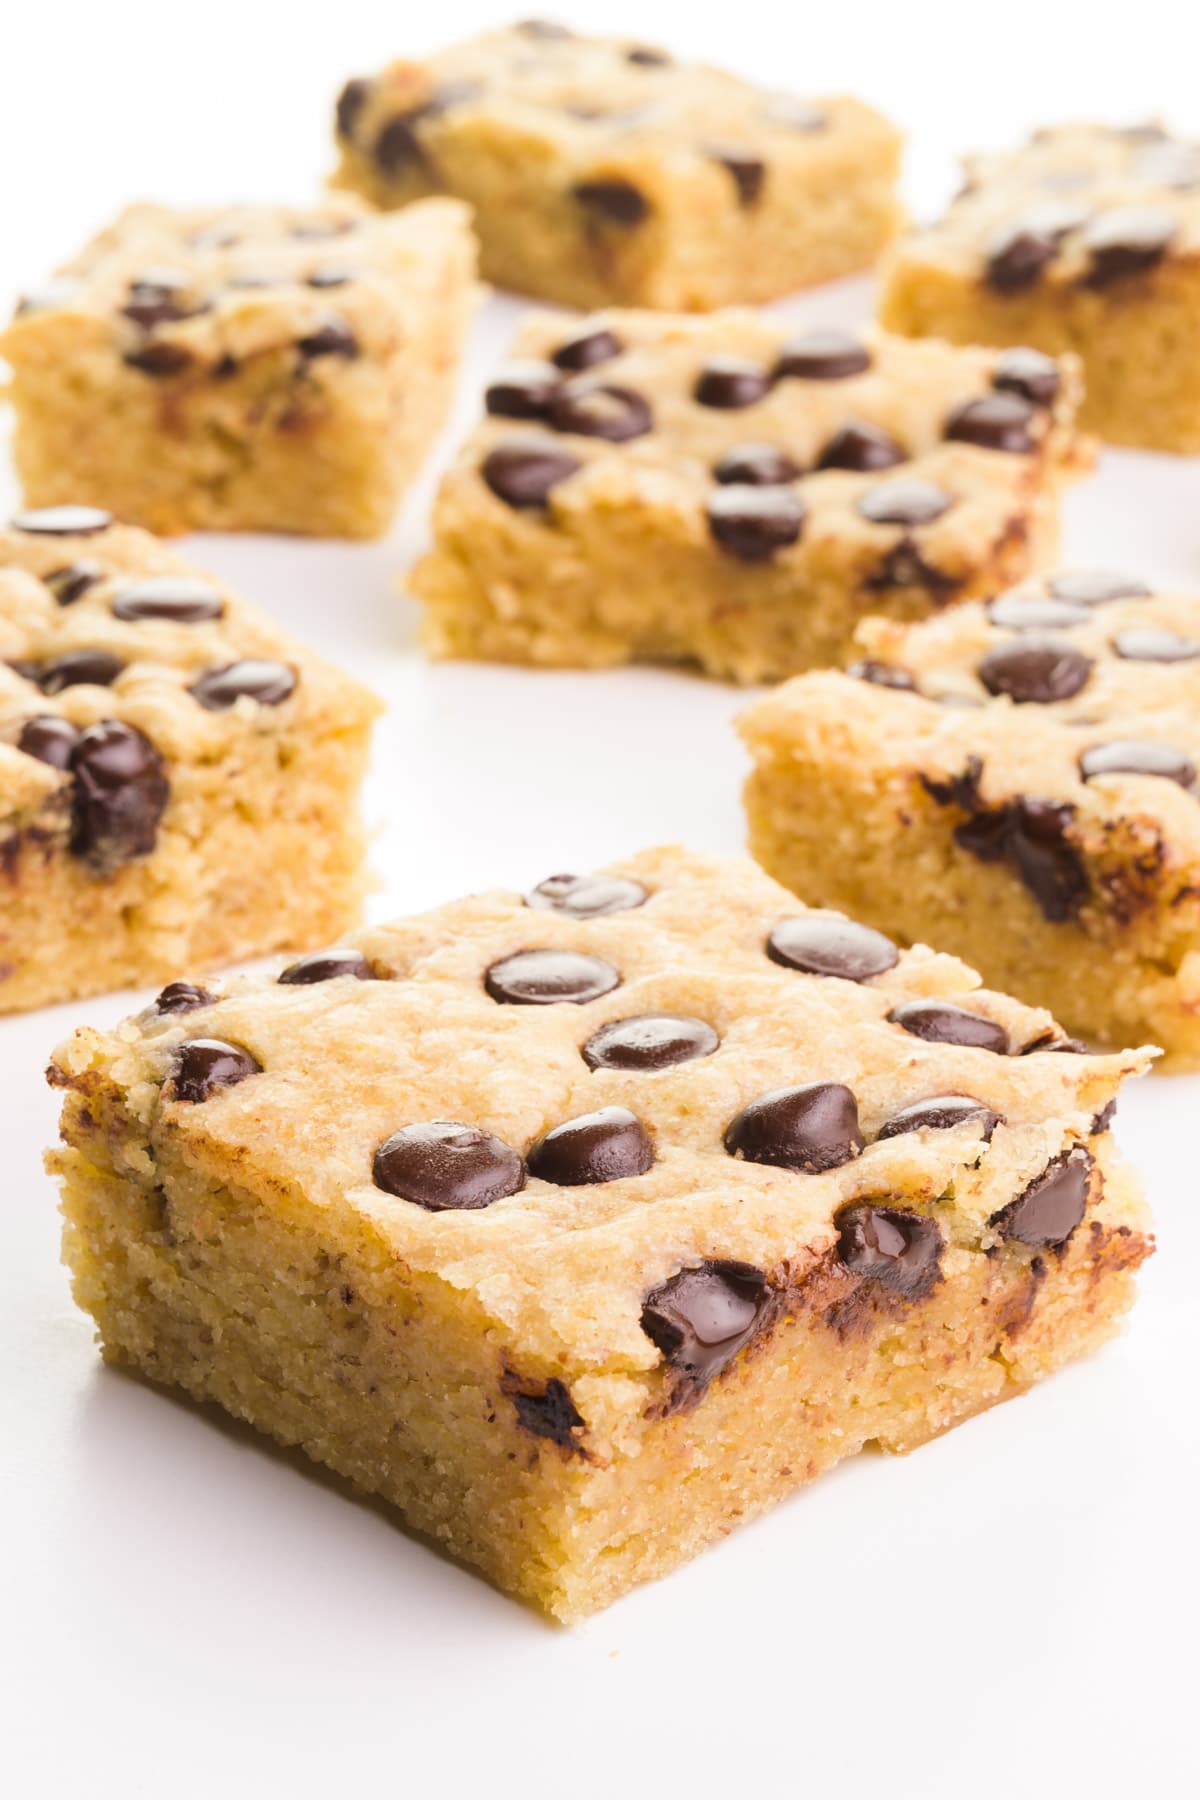 Several slices of vegan blondies have chocolate chips on top. They are displayed on a white table top.